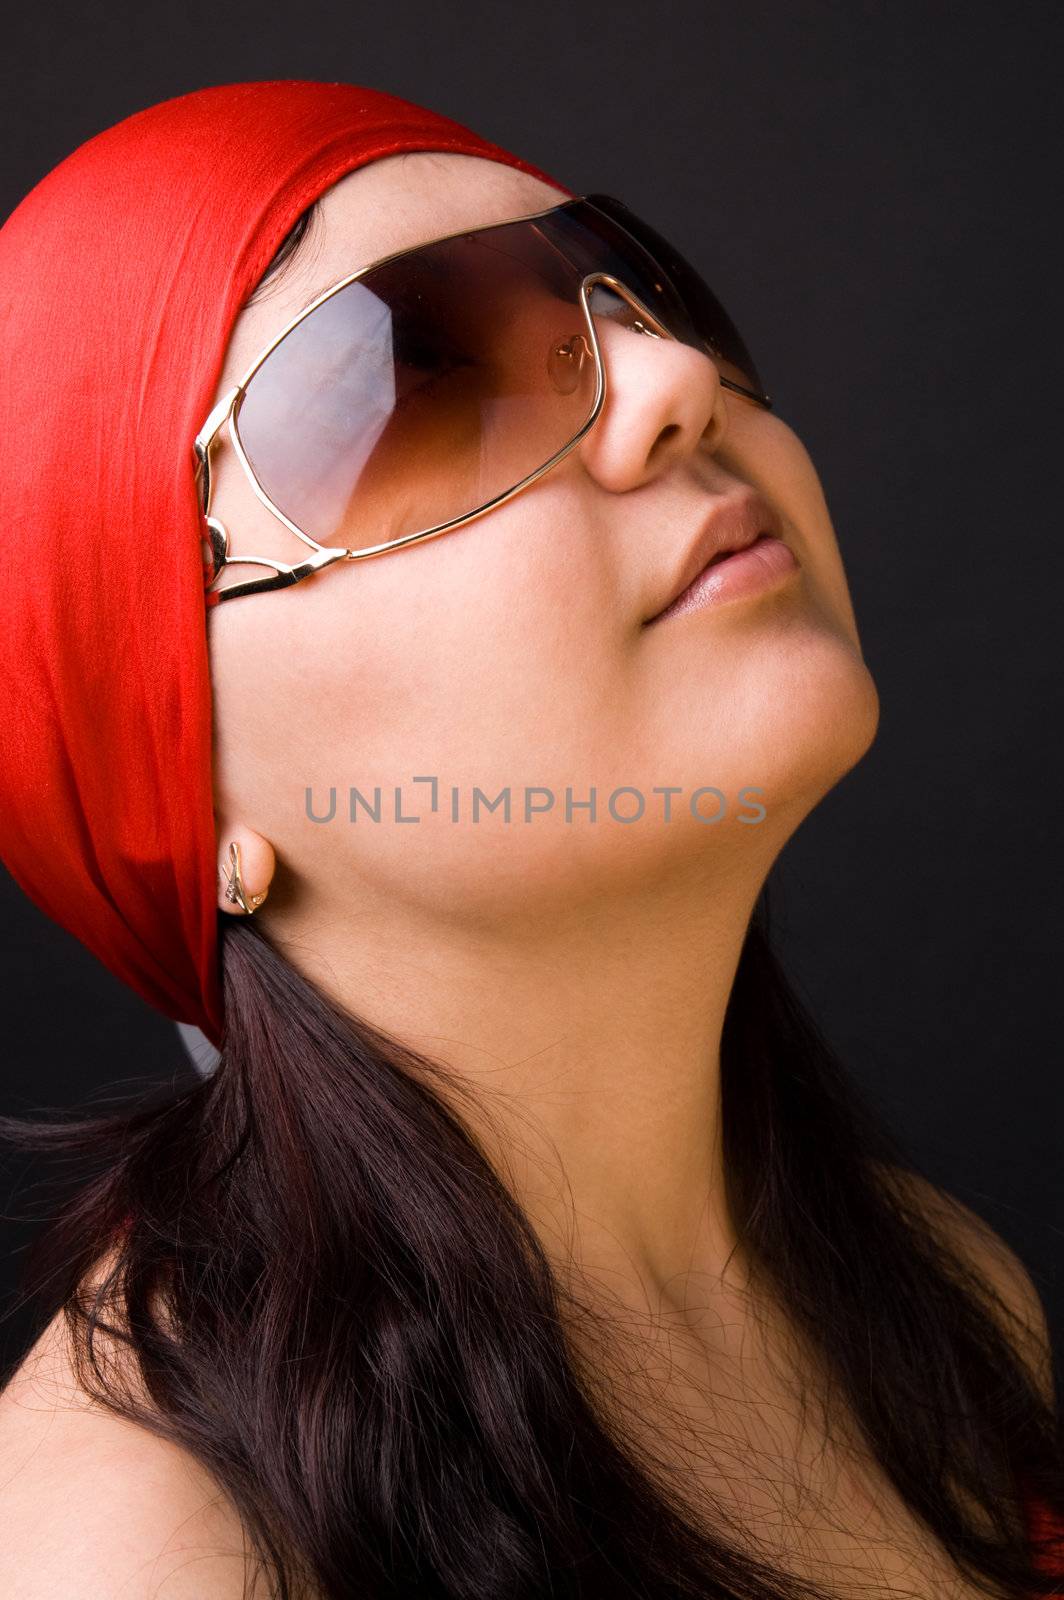 The girl in a red scarf and glasses by andyphoto